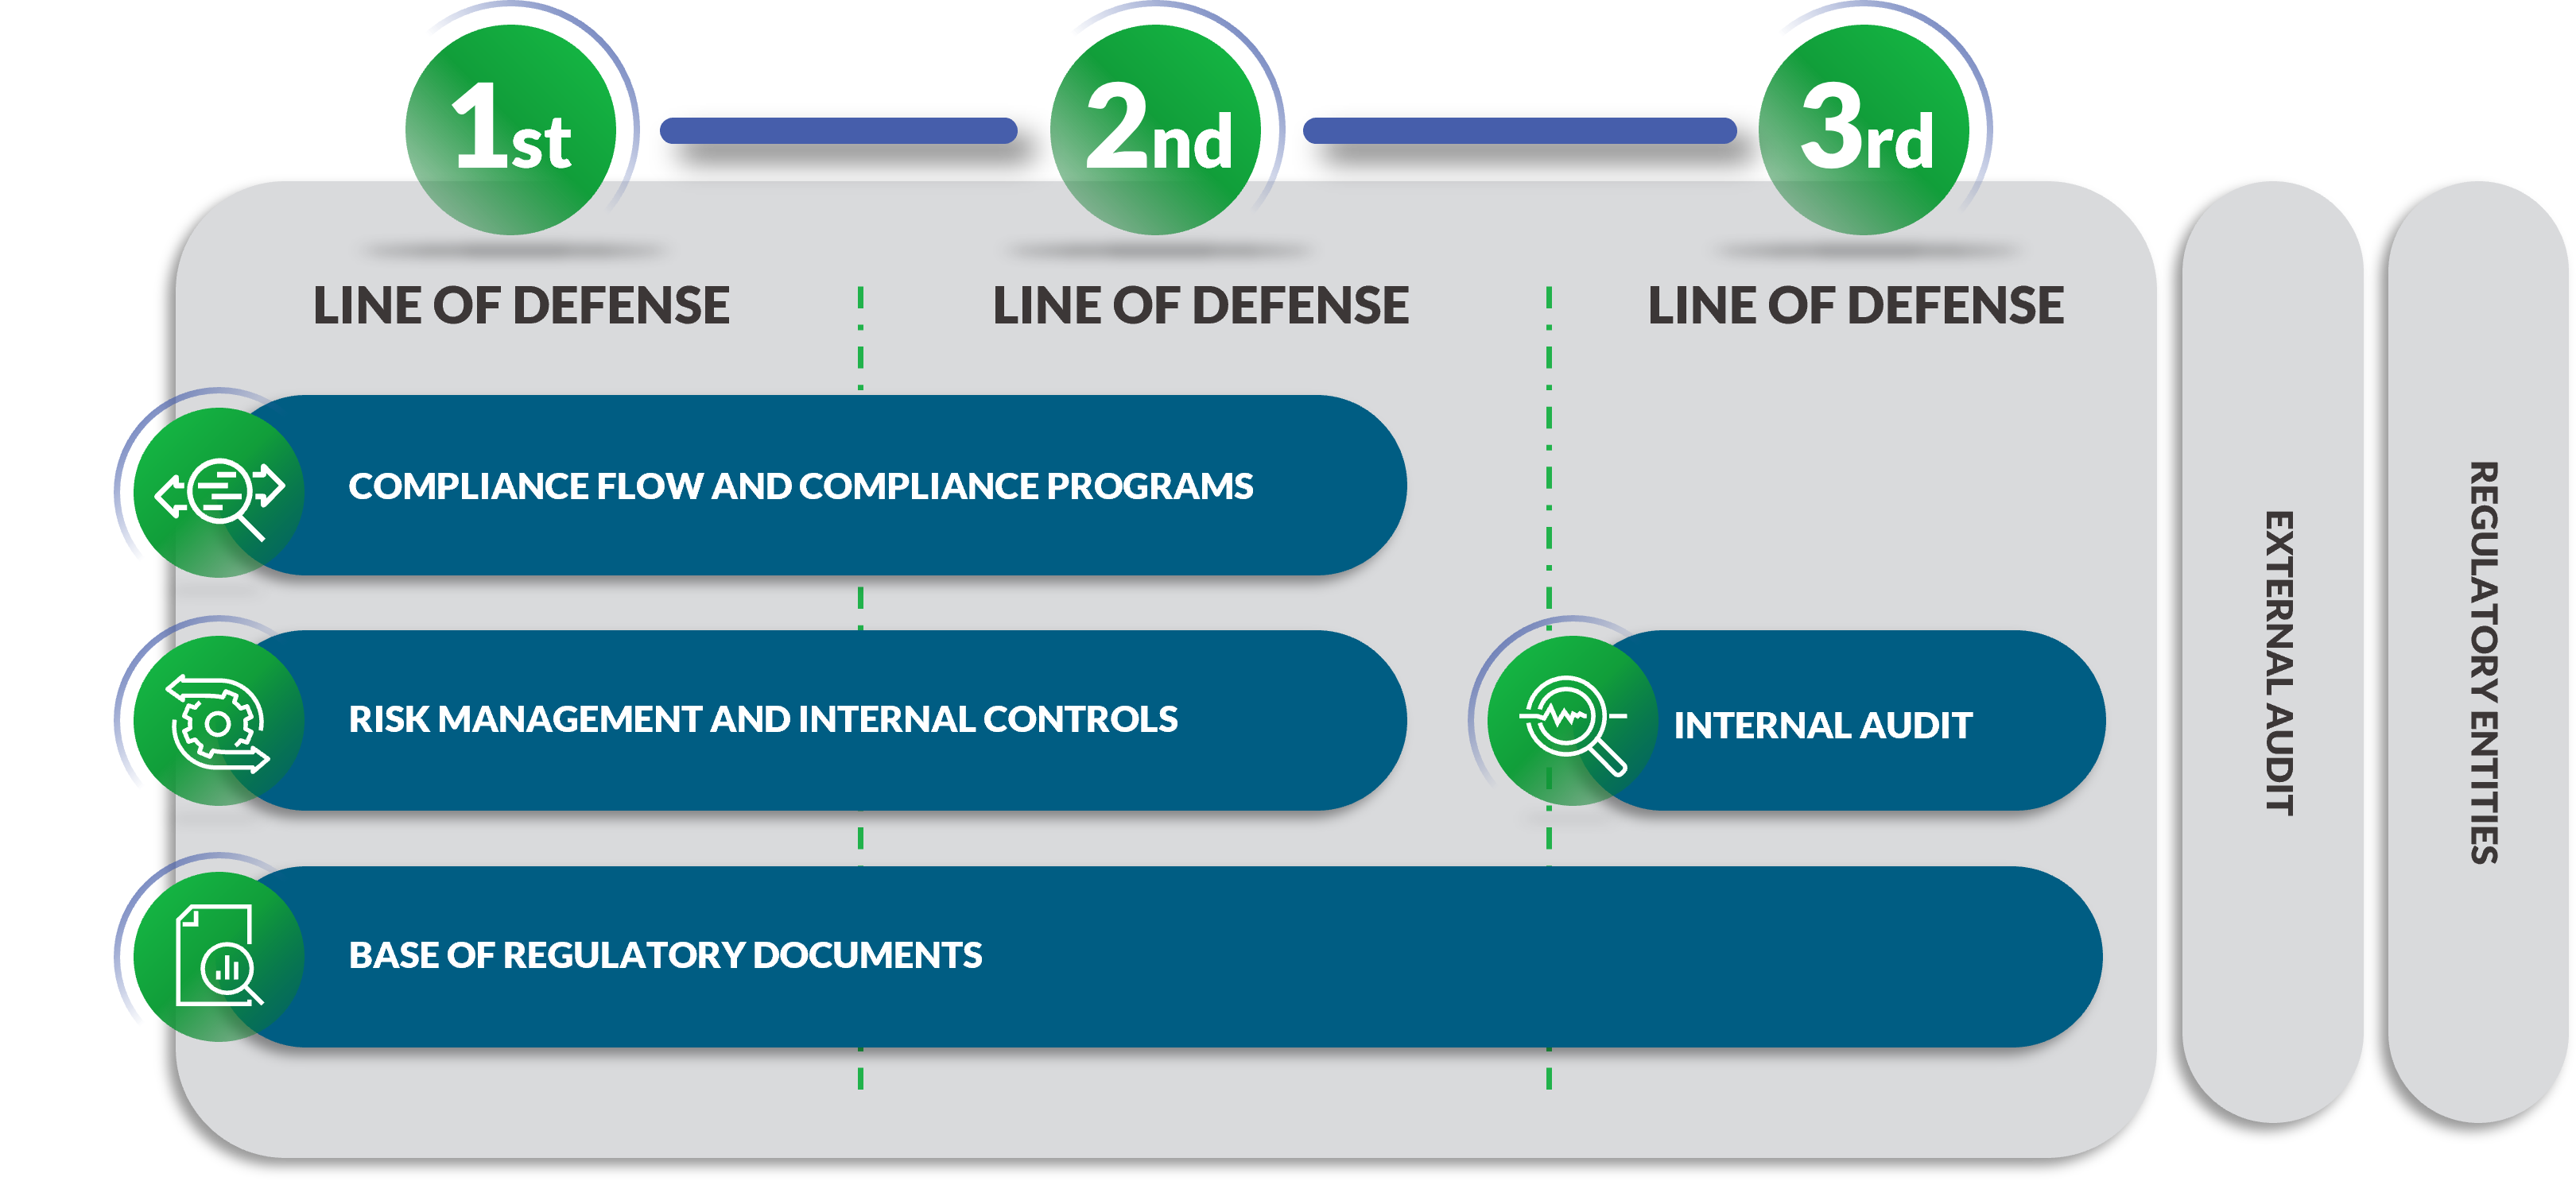 Graphic with the three lines of defense to the External Audit and the Regulatory Bodies, namely the Internal Audit and the Regulatory Basis at the third level. Risk Management and Internal Controls, Compliance Flows and Compliance Programs and Regulatory Basis at the first and second level